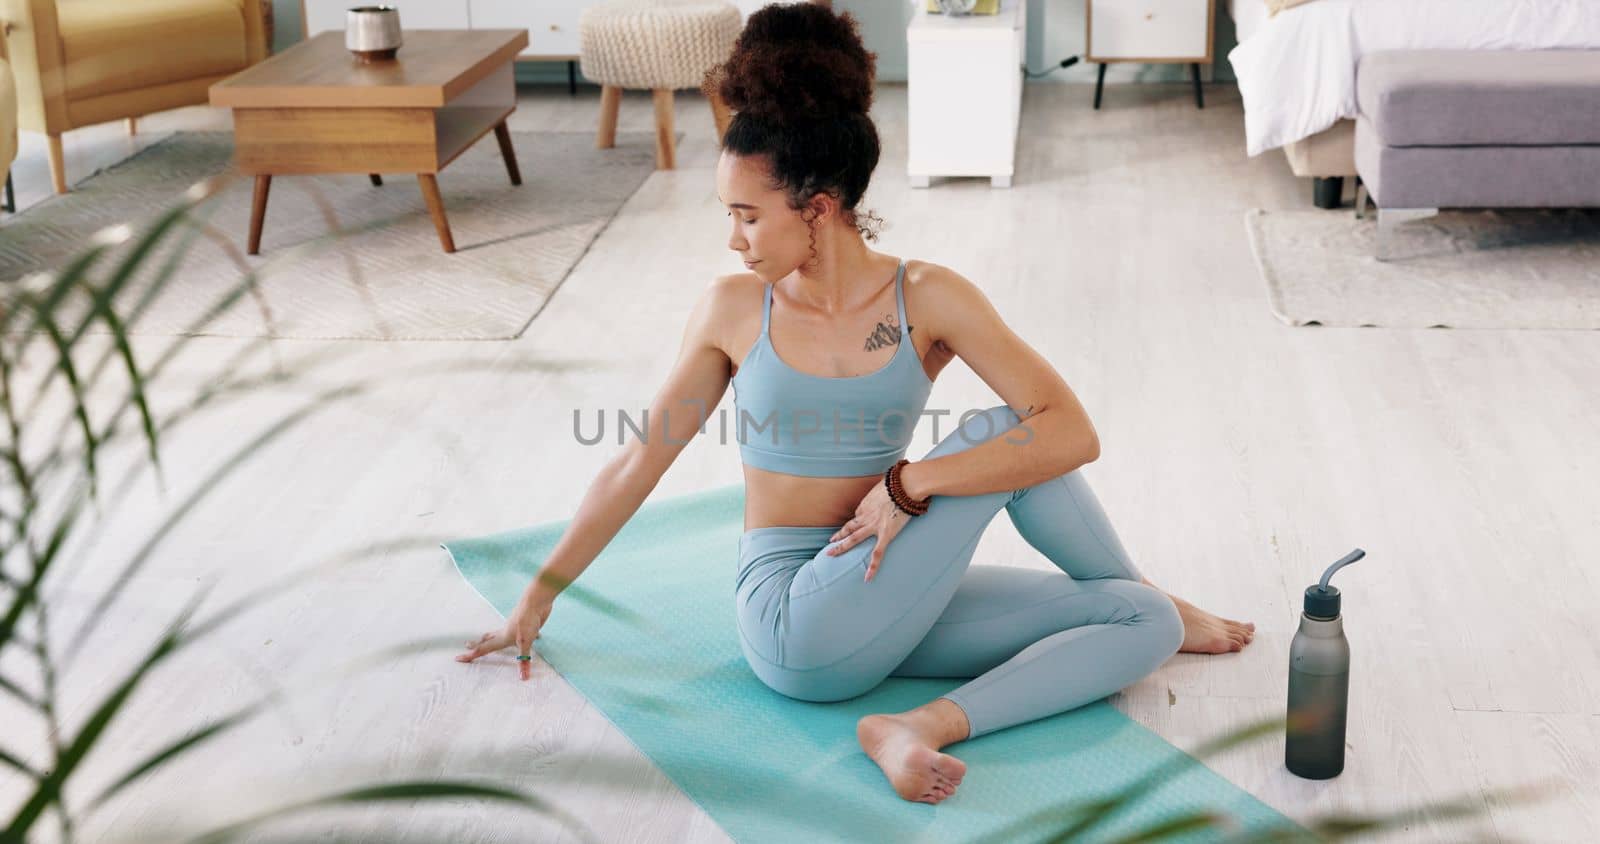 Fitness, yoga or meditation stretching woman for workout in the living room of her house. Girl with chakra focus, mindset or balance while training, exercise or health with zen pilates for wellness